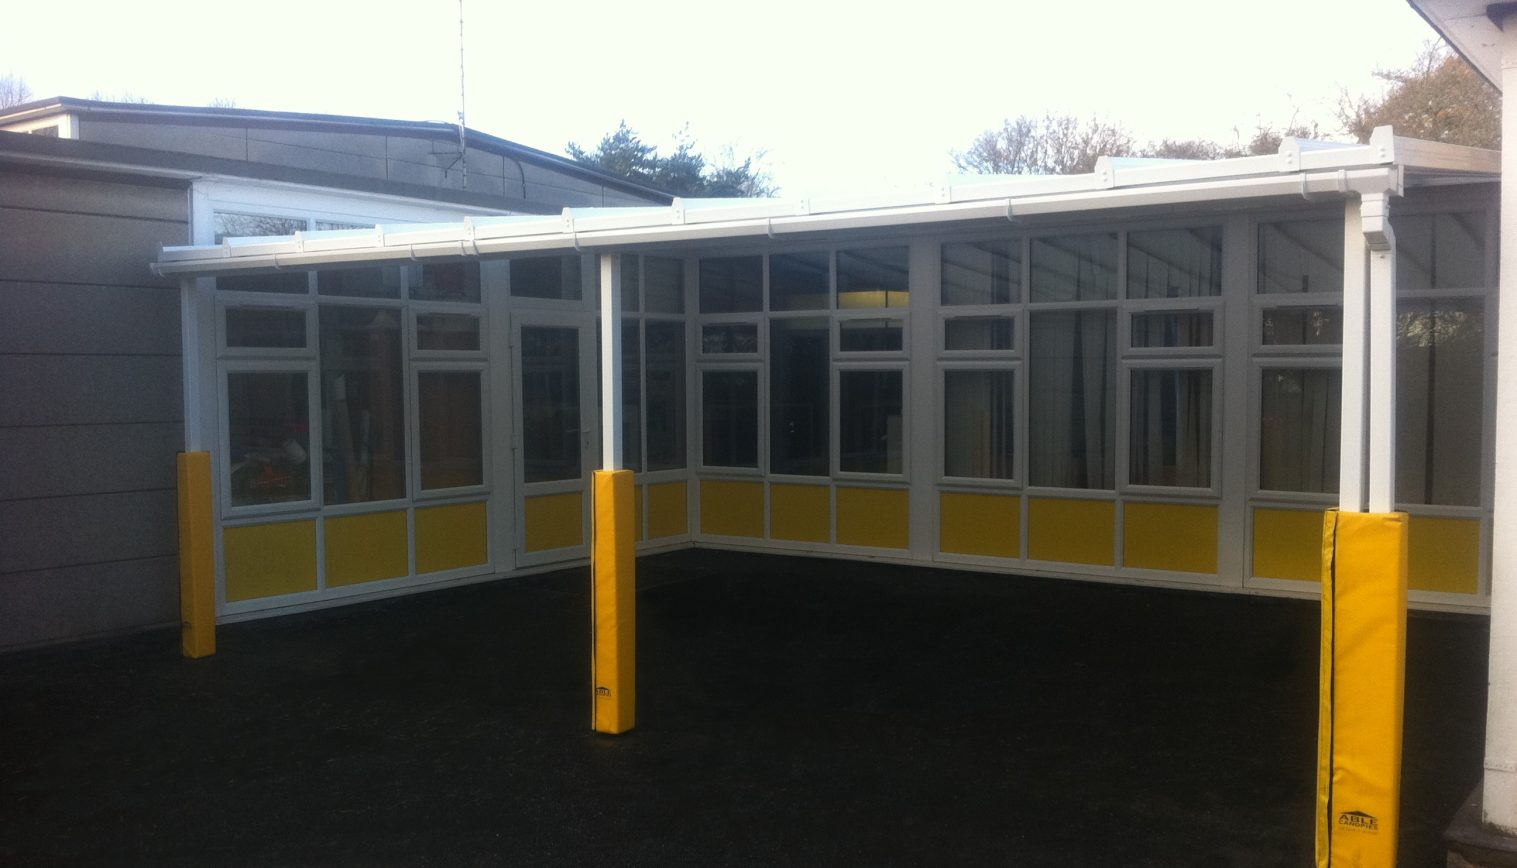 Hobbs Hill Wood Primary School – Wall Mounted Canopy – Third Install